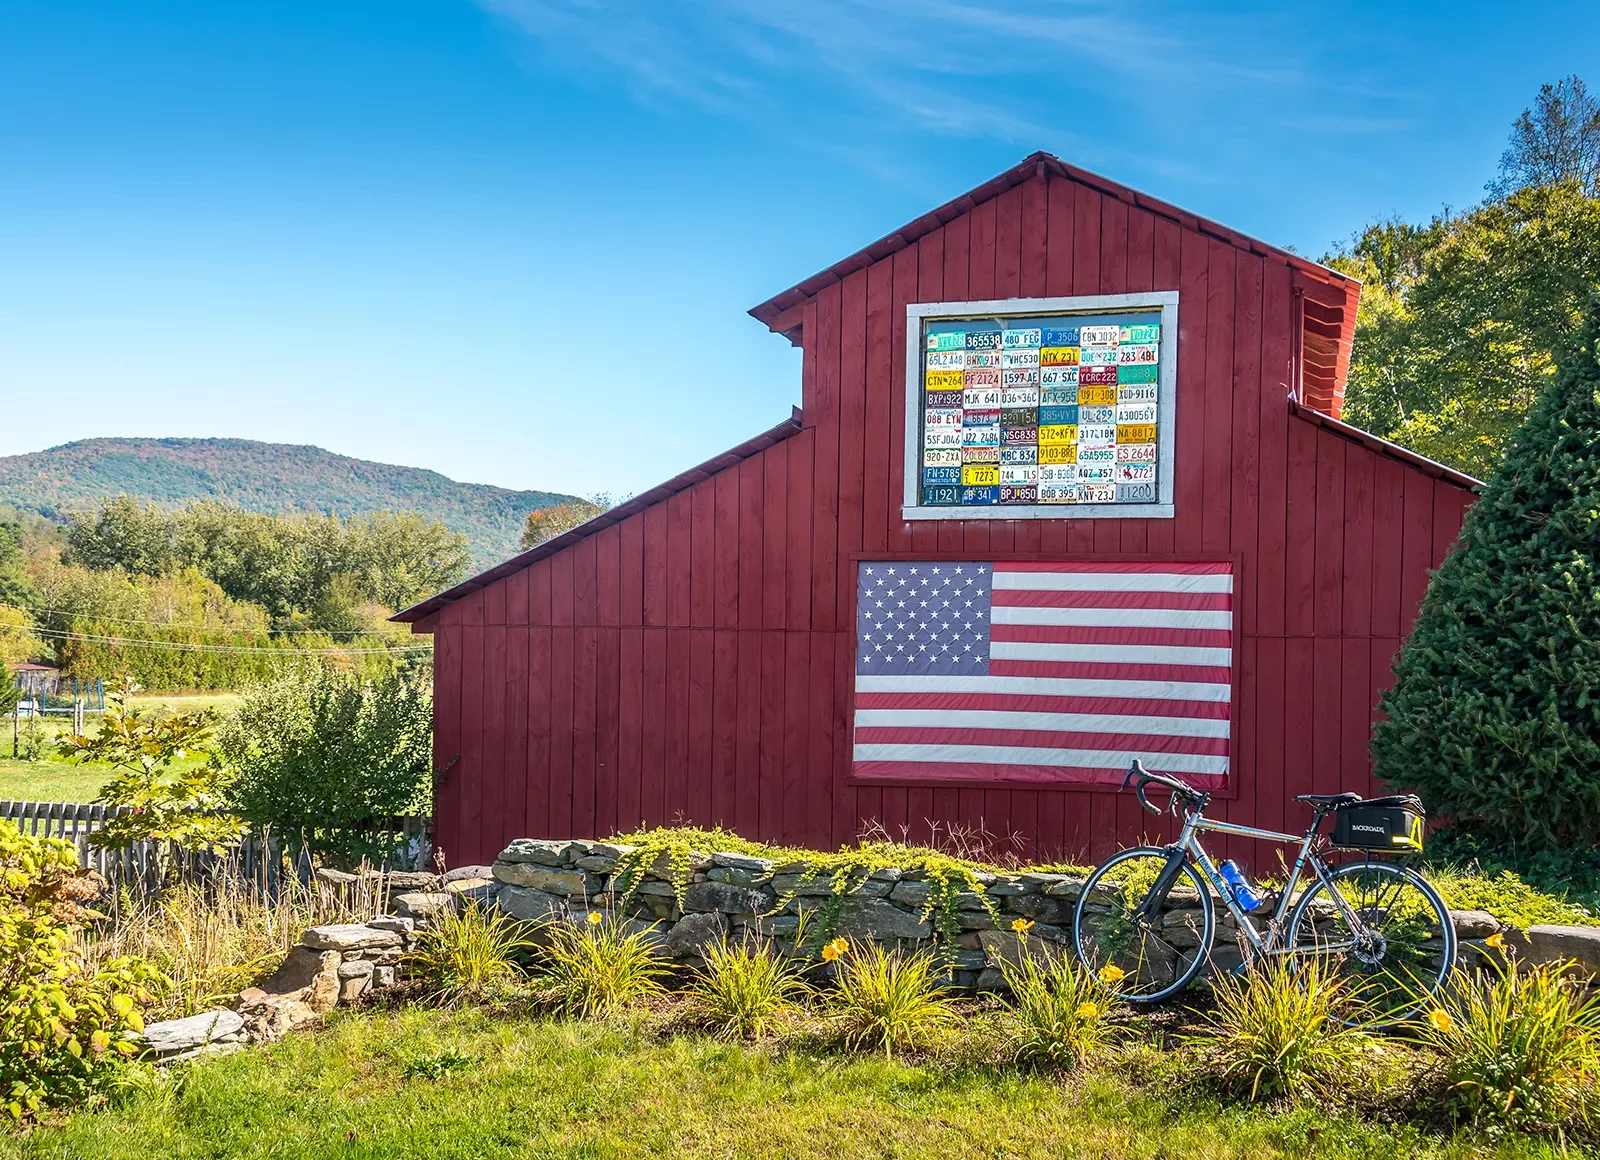 Shot of bike in front of red barn, US flag on barn wall.